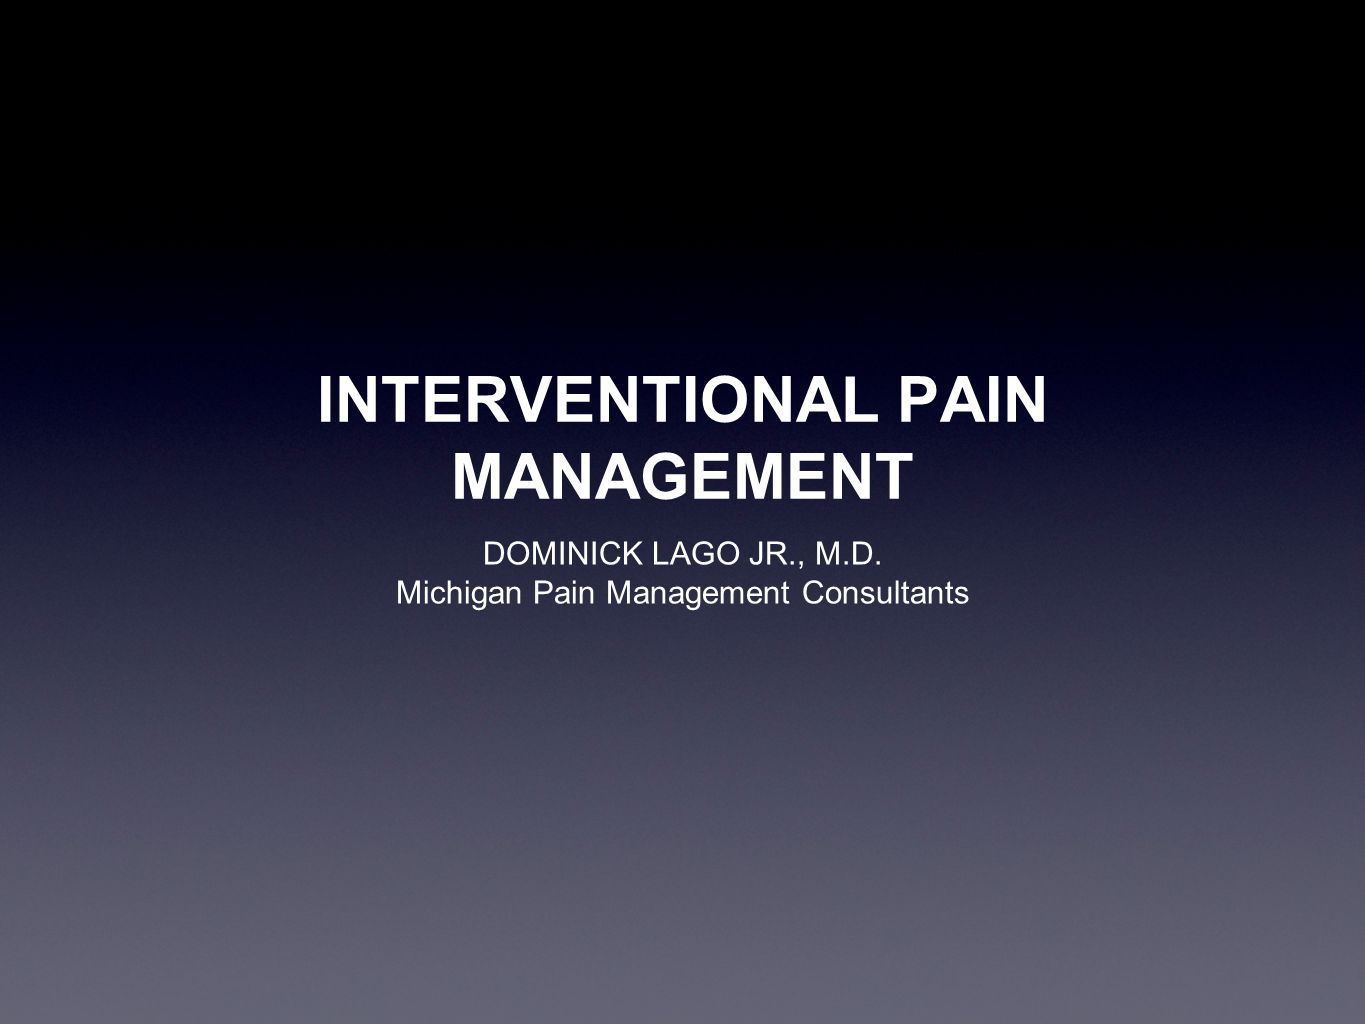 INTERVENTIONAL PAIN MANAGEMENT - ppt video online download